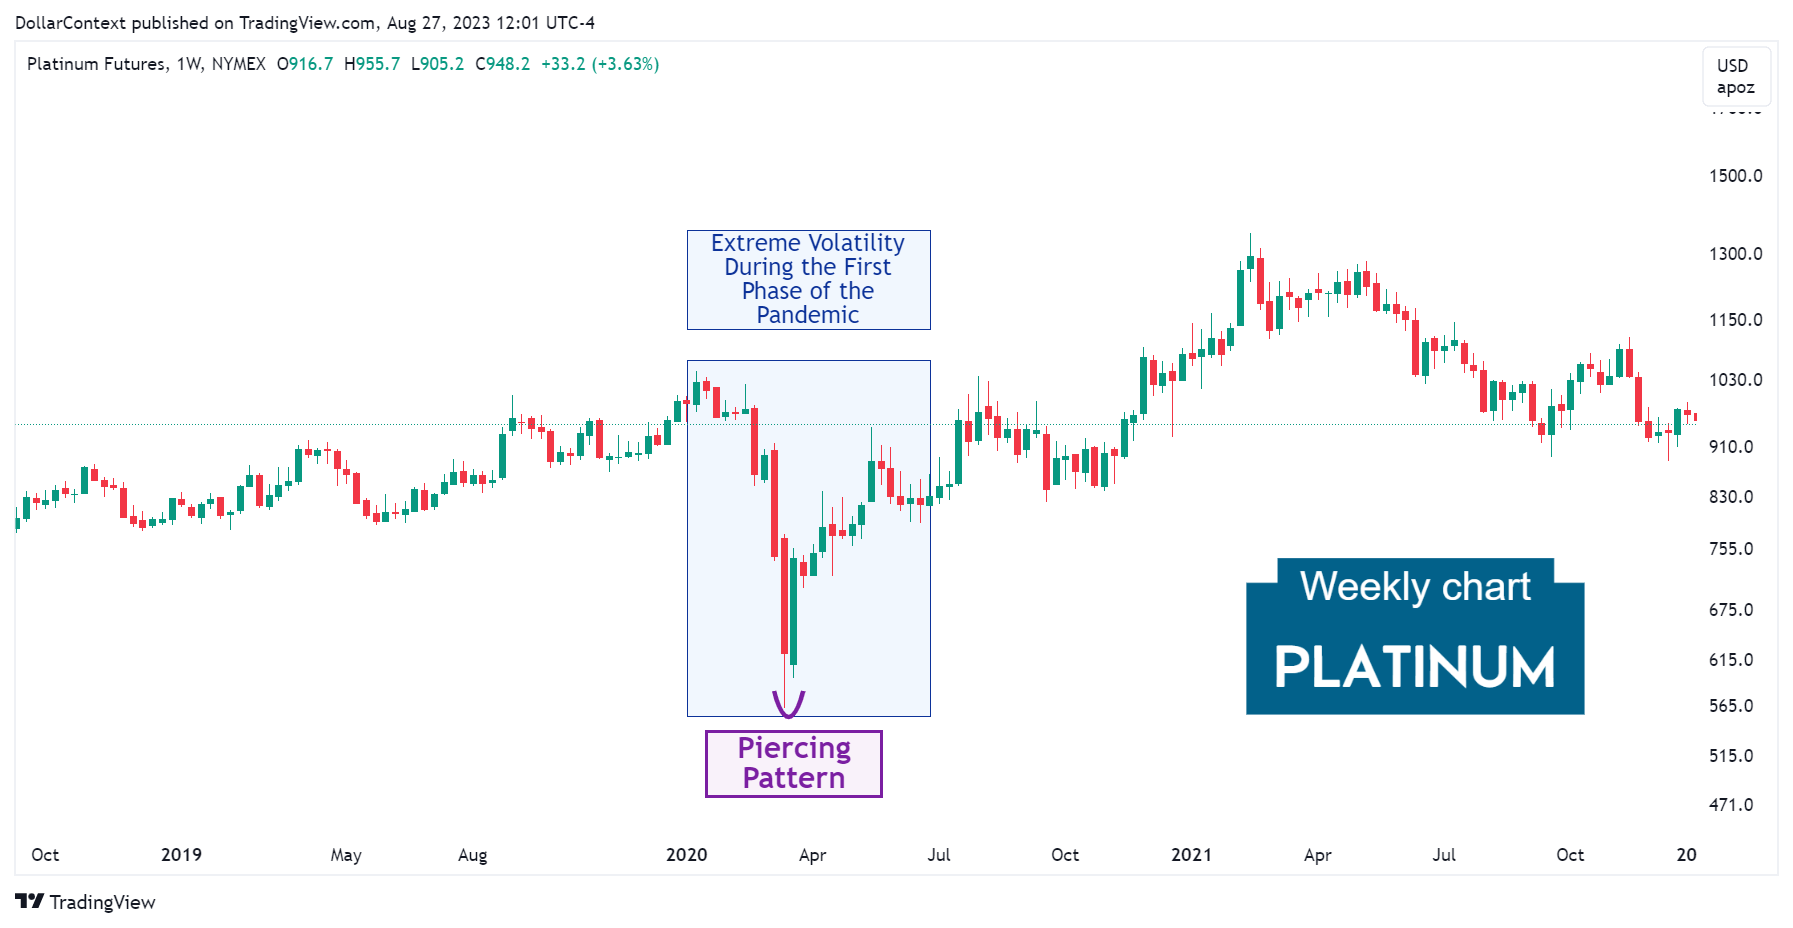 Platinum Futures: Piercing Pattern in March 2020 (Weekly Chart)